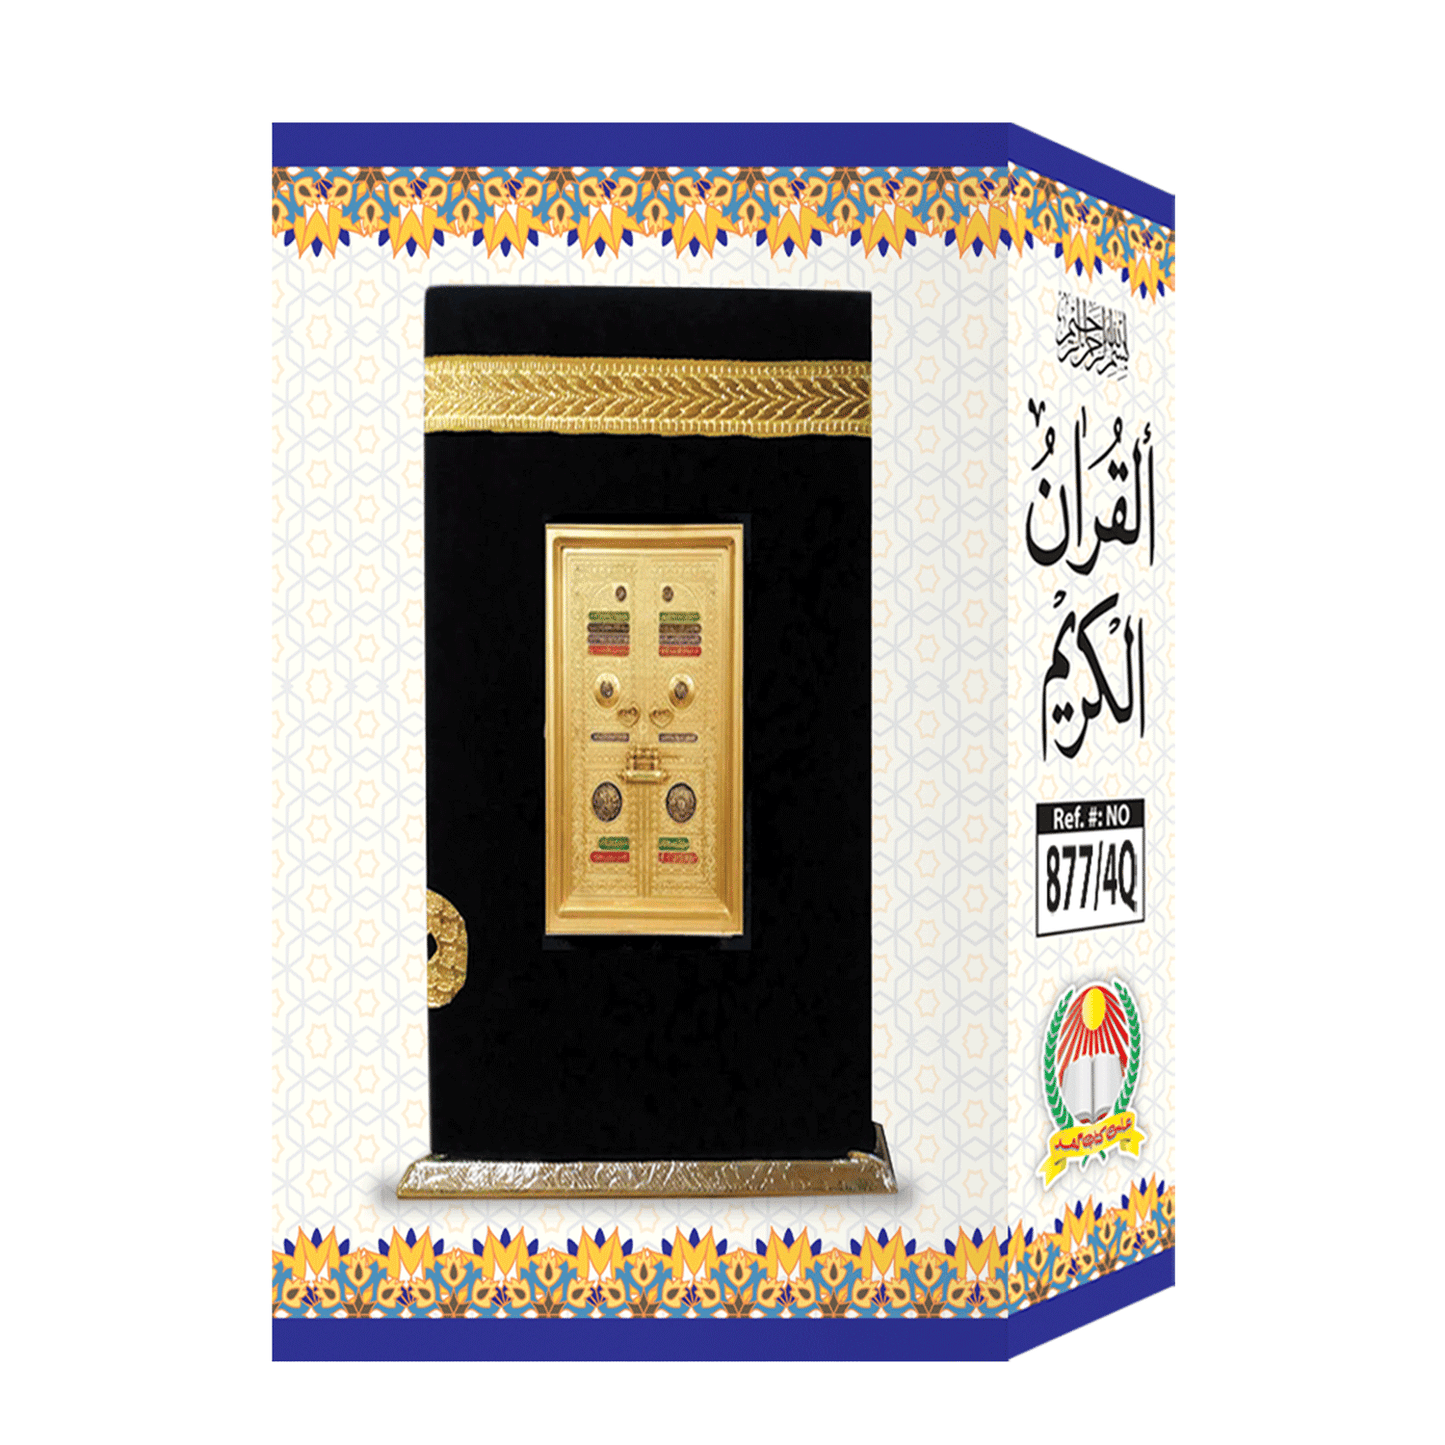 [877/4Q] Al-Quran-Ul-Kareem In 16 Lines With Tajweed Rules (Without Translation) - Gift Edition